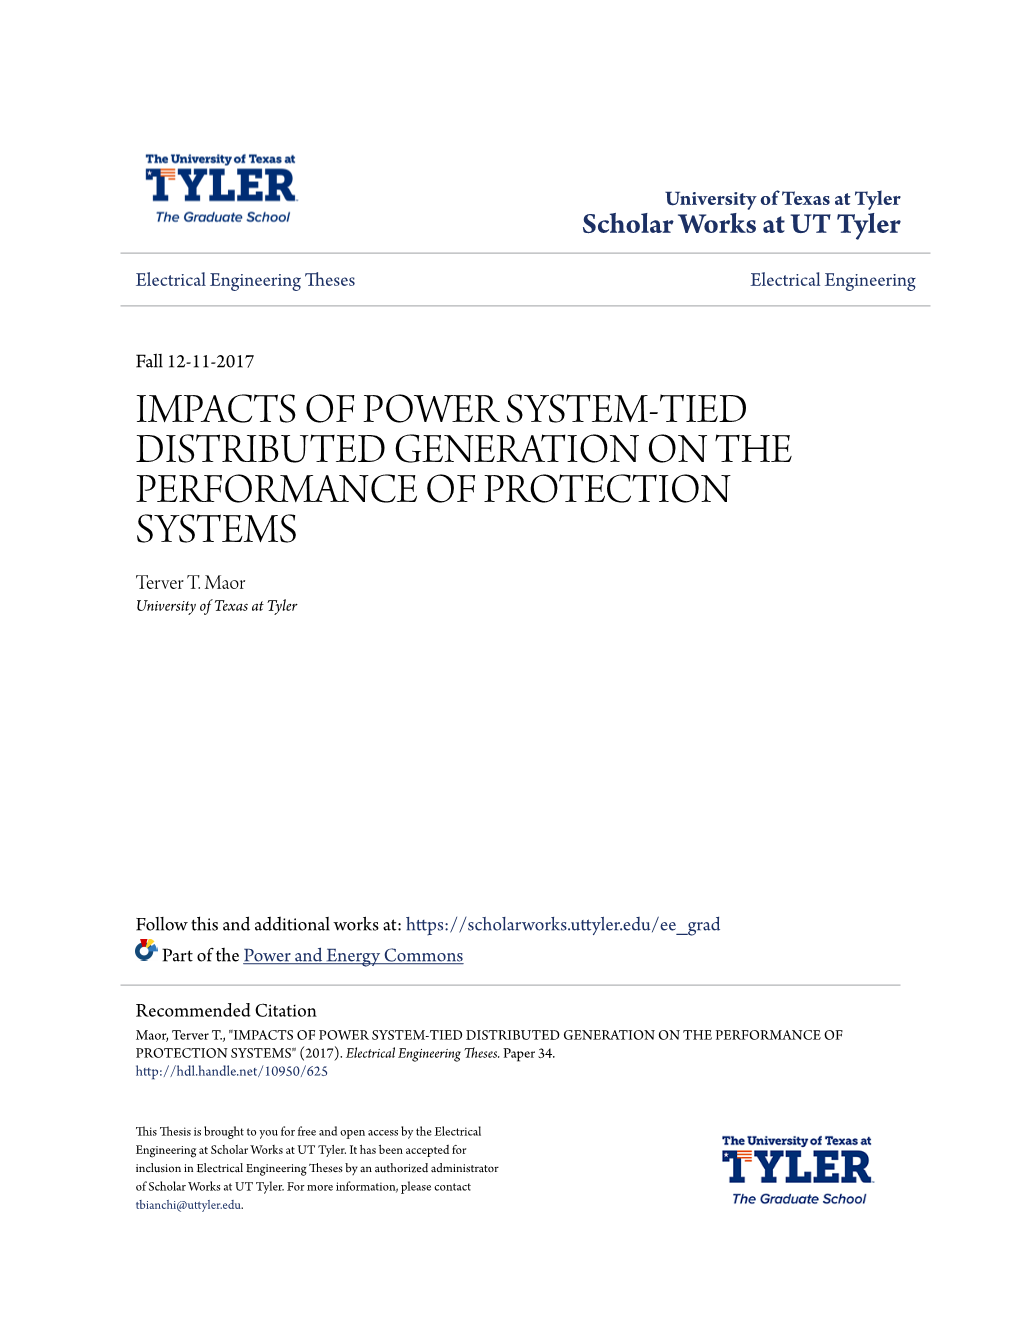 IMPACTS of POWER SYSTEM-TIED DISTRIBUTED GENERATION on the PERFORMANCE of PROTECTION SYSTEMS Terver T